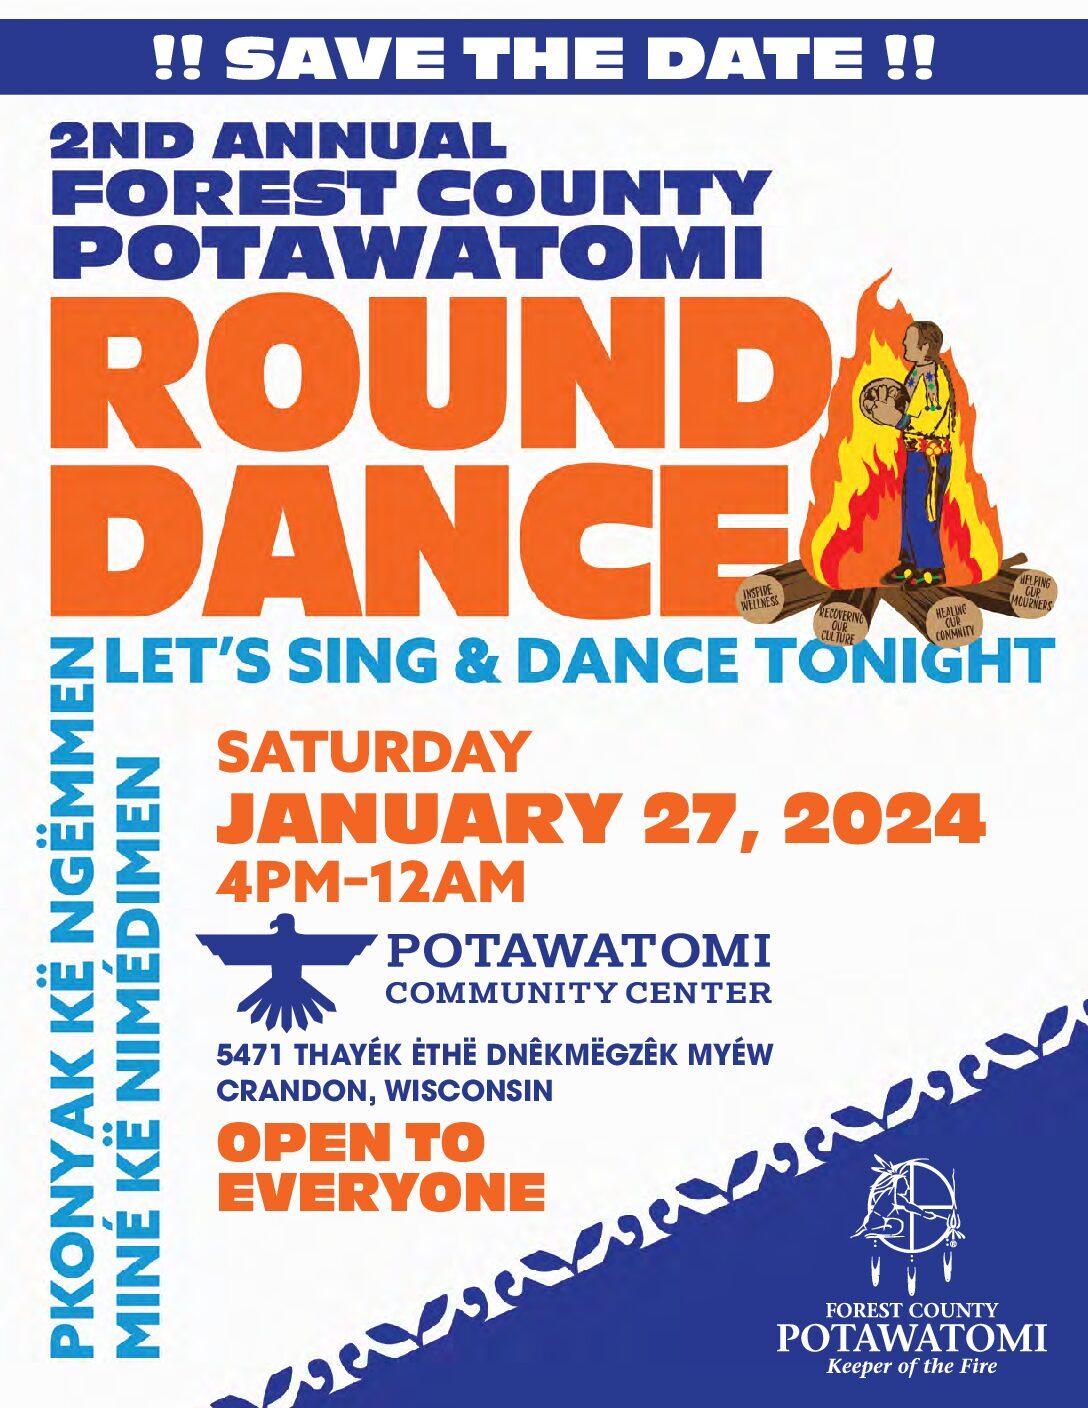 2nd Annual Forest County Potawatomi Round Dance - Forest County Potawatomi